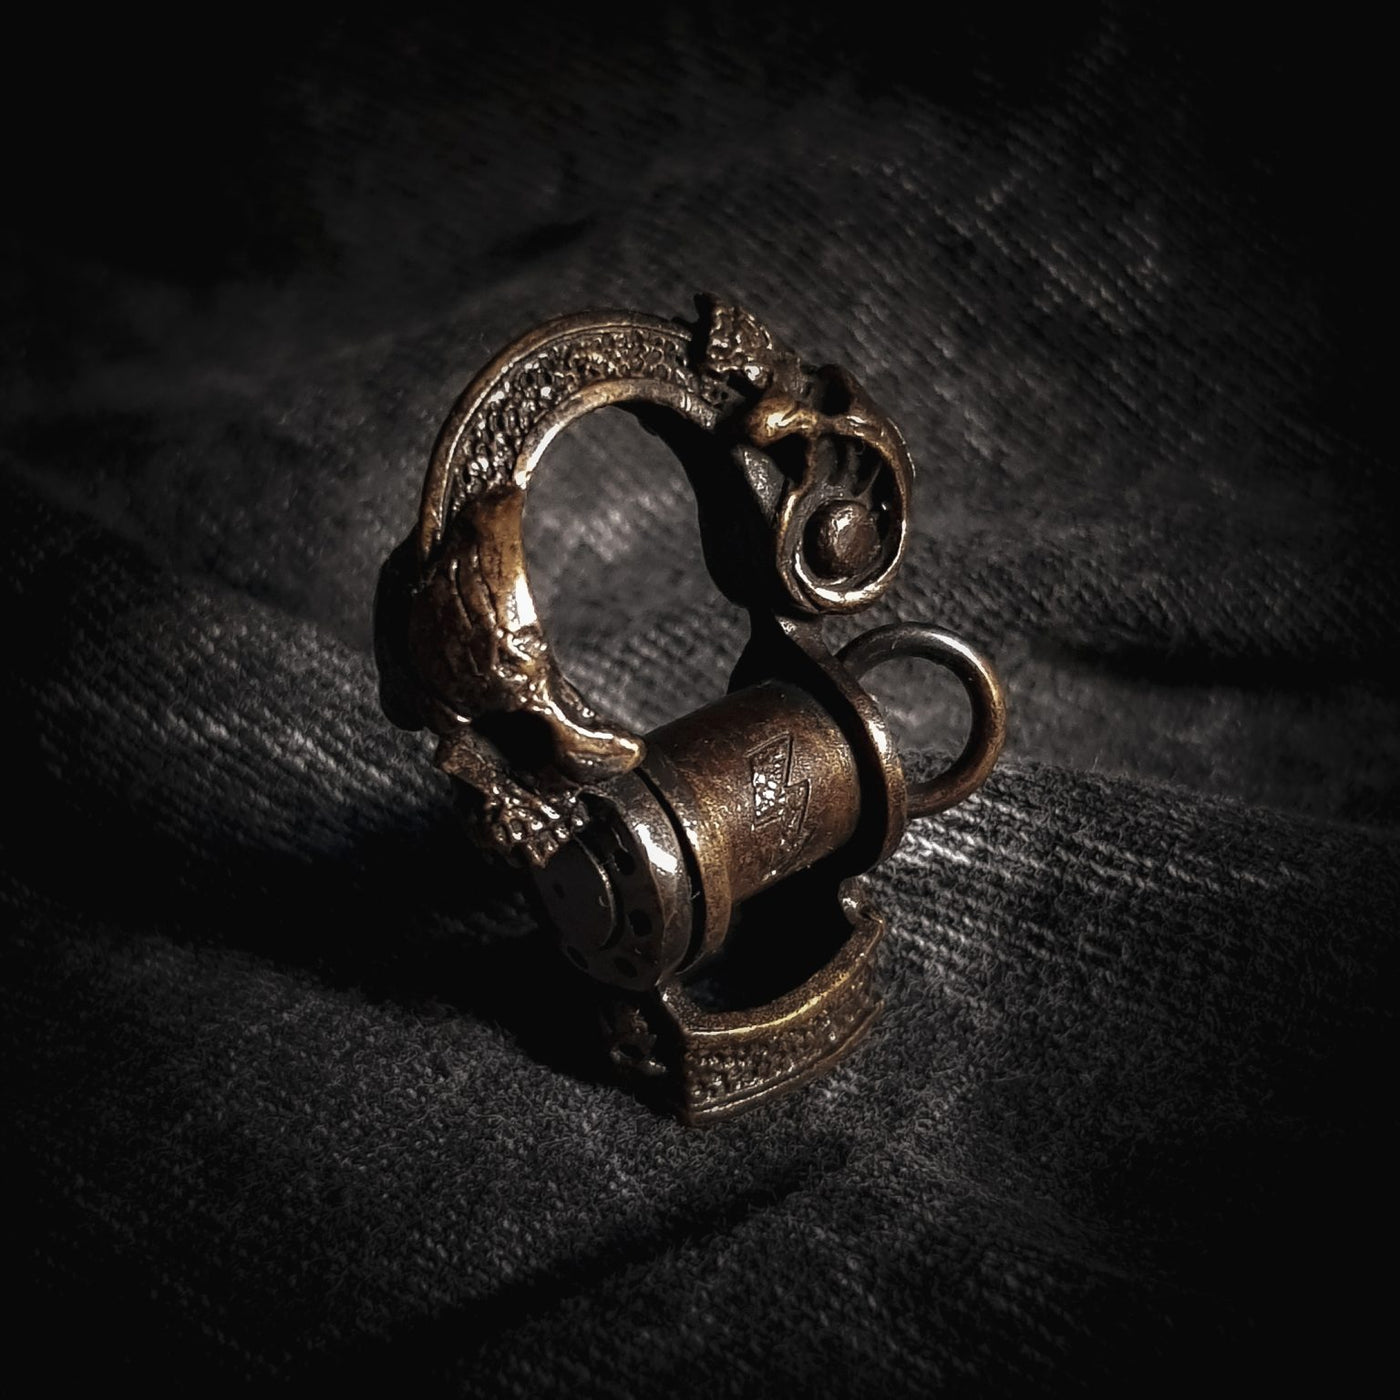 Skull catapult shackle from Covenant gears